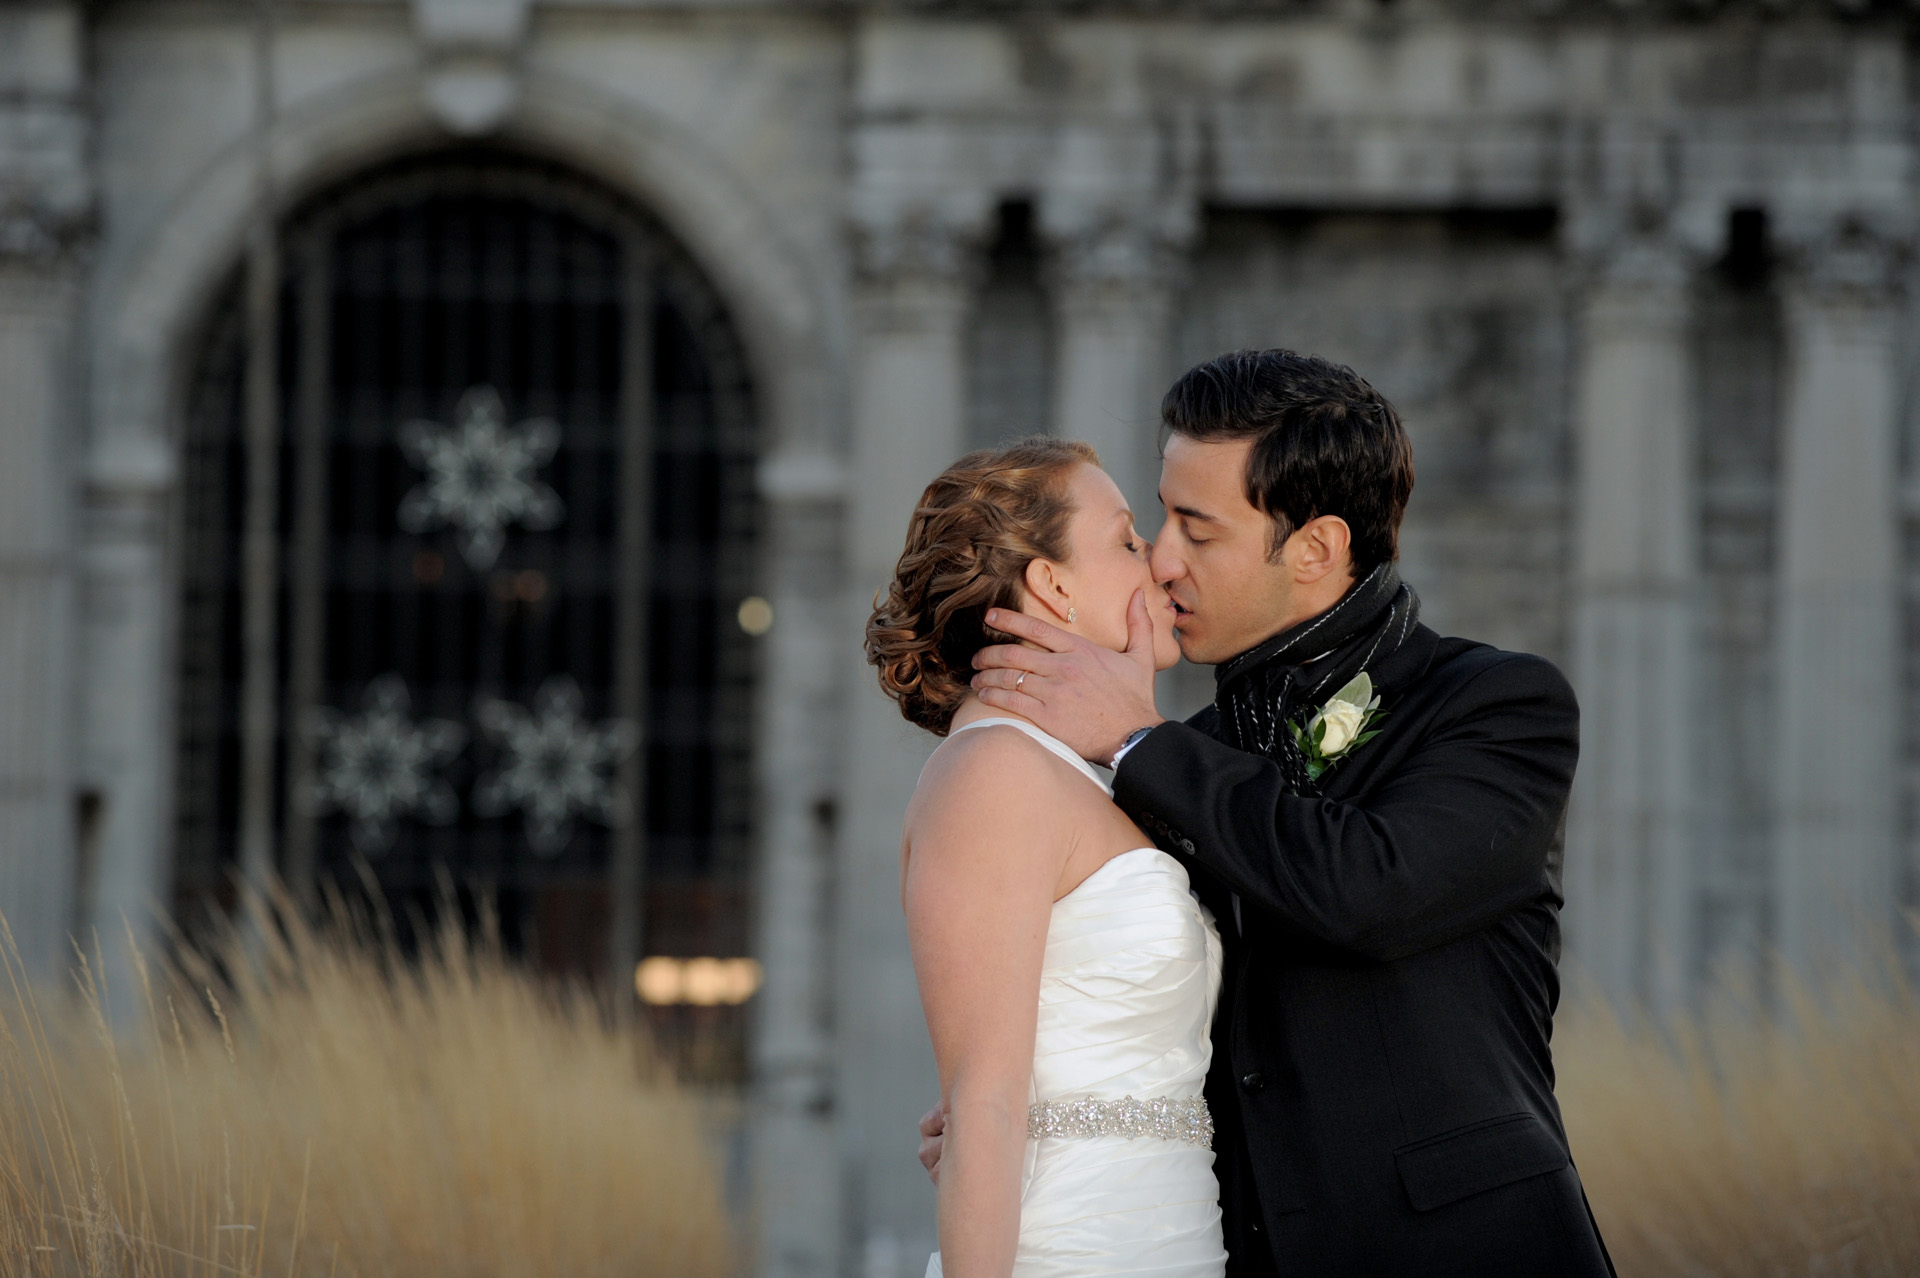 The Historic church Sweetest Heart of Mary and the Dearborn Inn of Detroit's historic church in Detroit and Dearborn, Michigan wedding photographer's photo of the wedding couple at Detroit's historic train station for wedding photos in Detroit, Michigan.